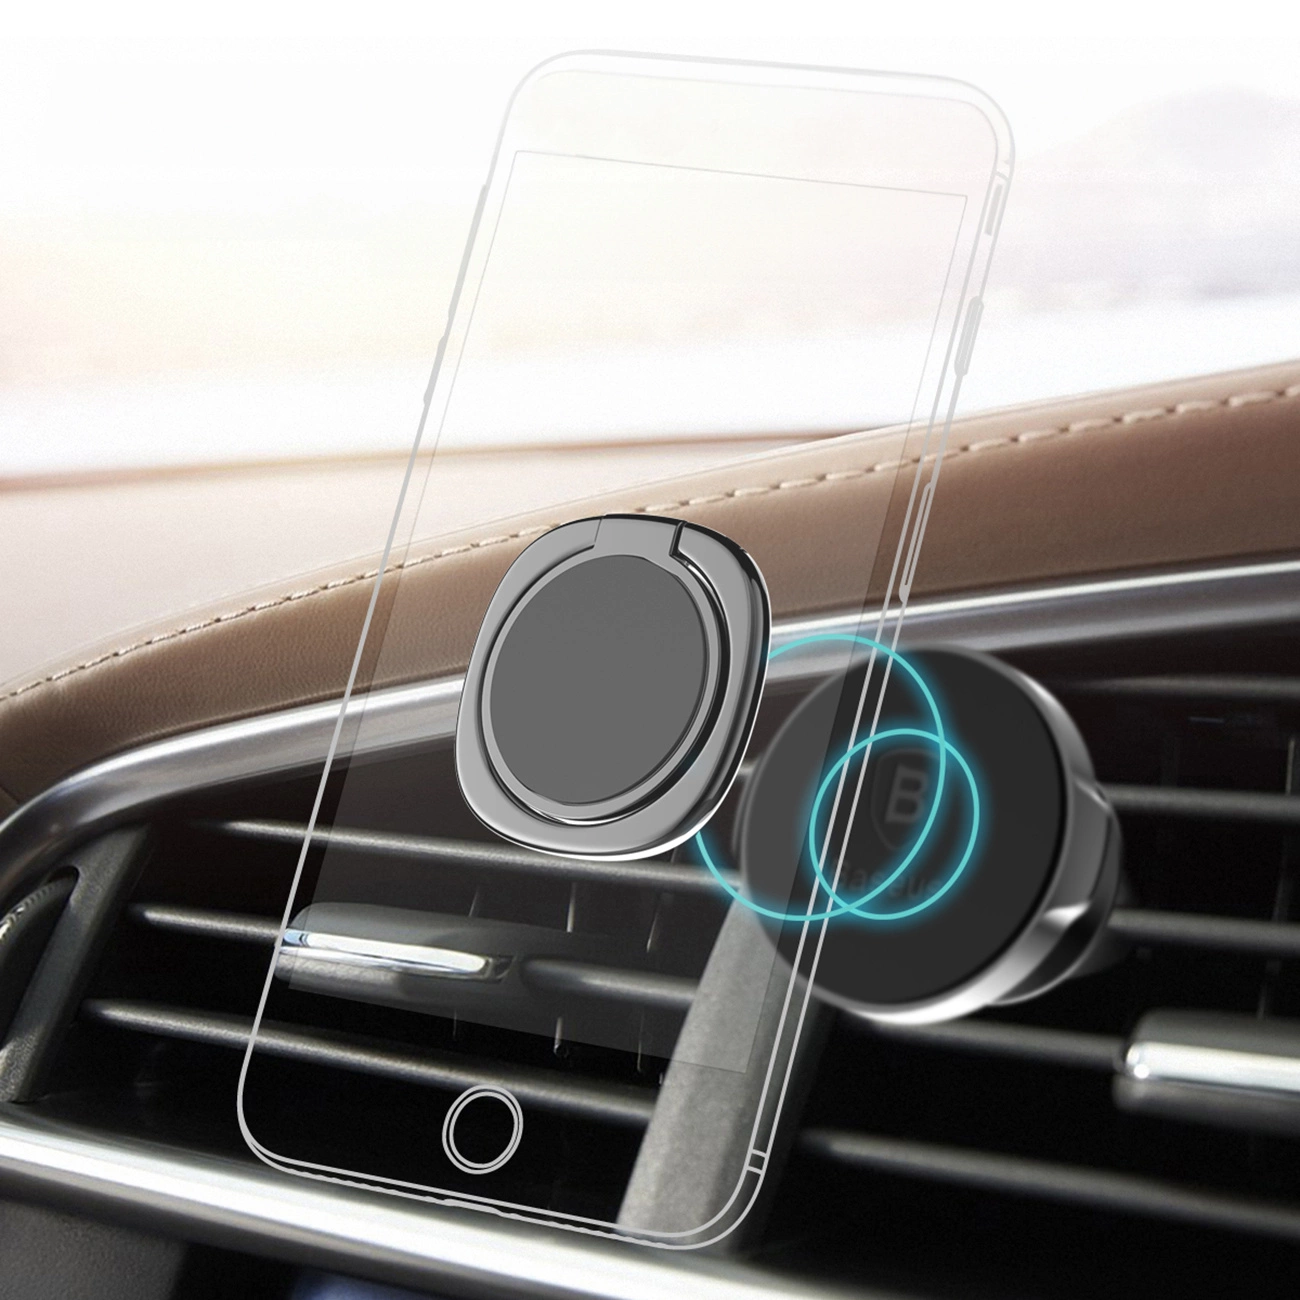 Visualization of attaching the black Baseus Privity Ring holder to the phone holder in the car's ventilation grill